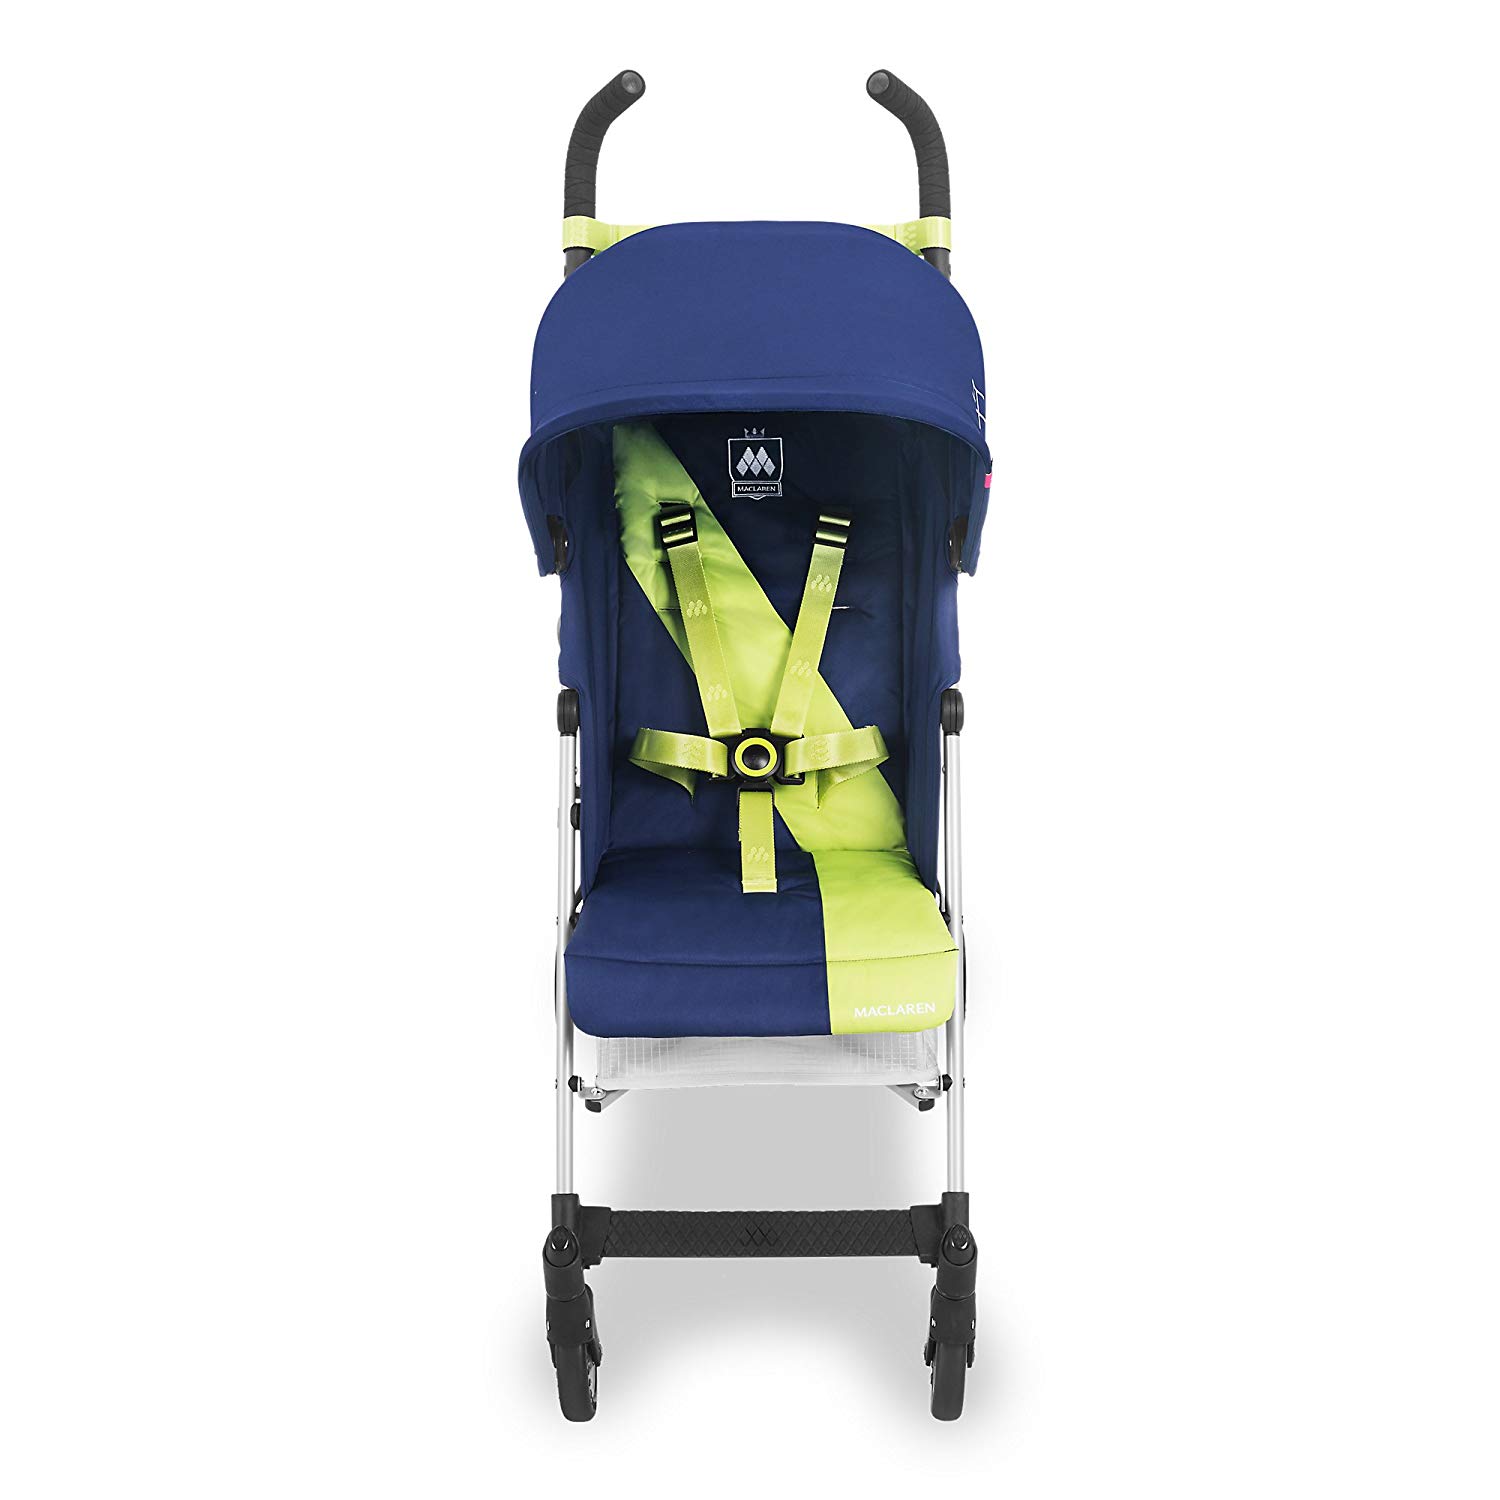 Maclaren Triumph Buggy - Lightweight, sporty, carries up to 25kg. Extendable UPF50+/waterproof canopy, adjustable, washable, padded seat, 4-wheel suspension. Raincover included